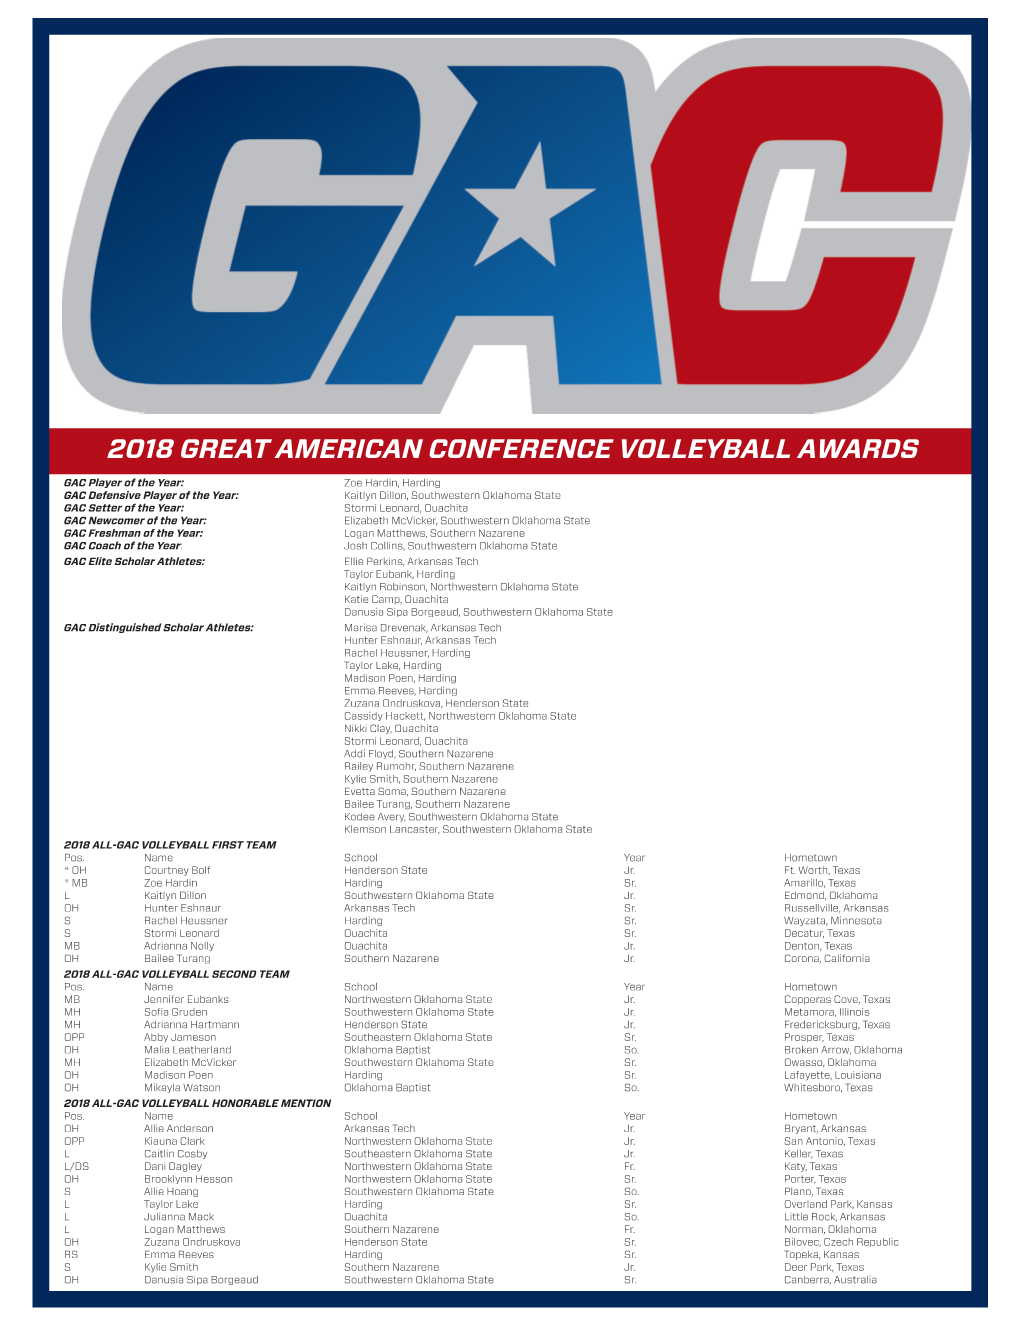 2018 Great American Conference Volleyball Awards